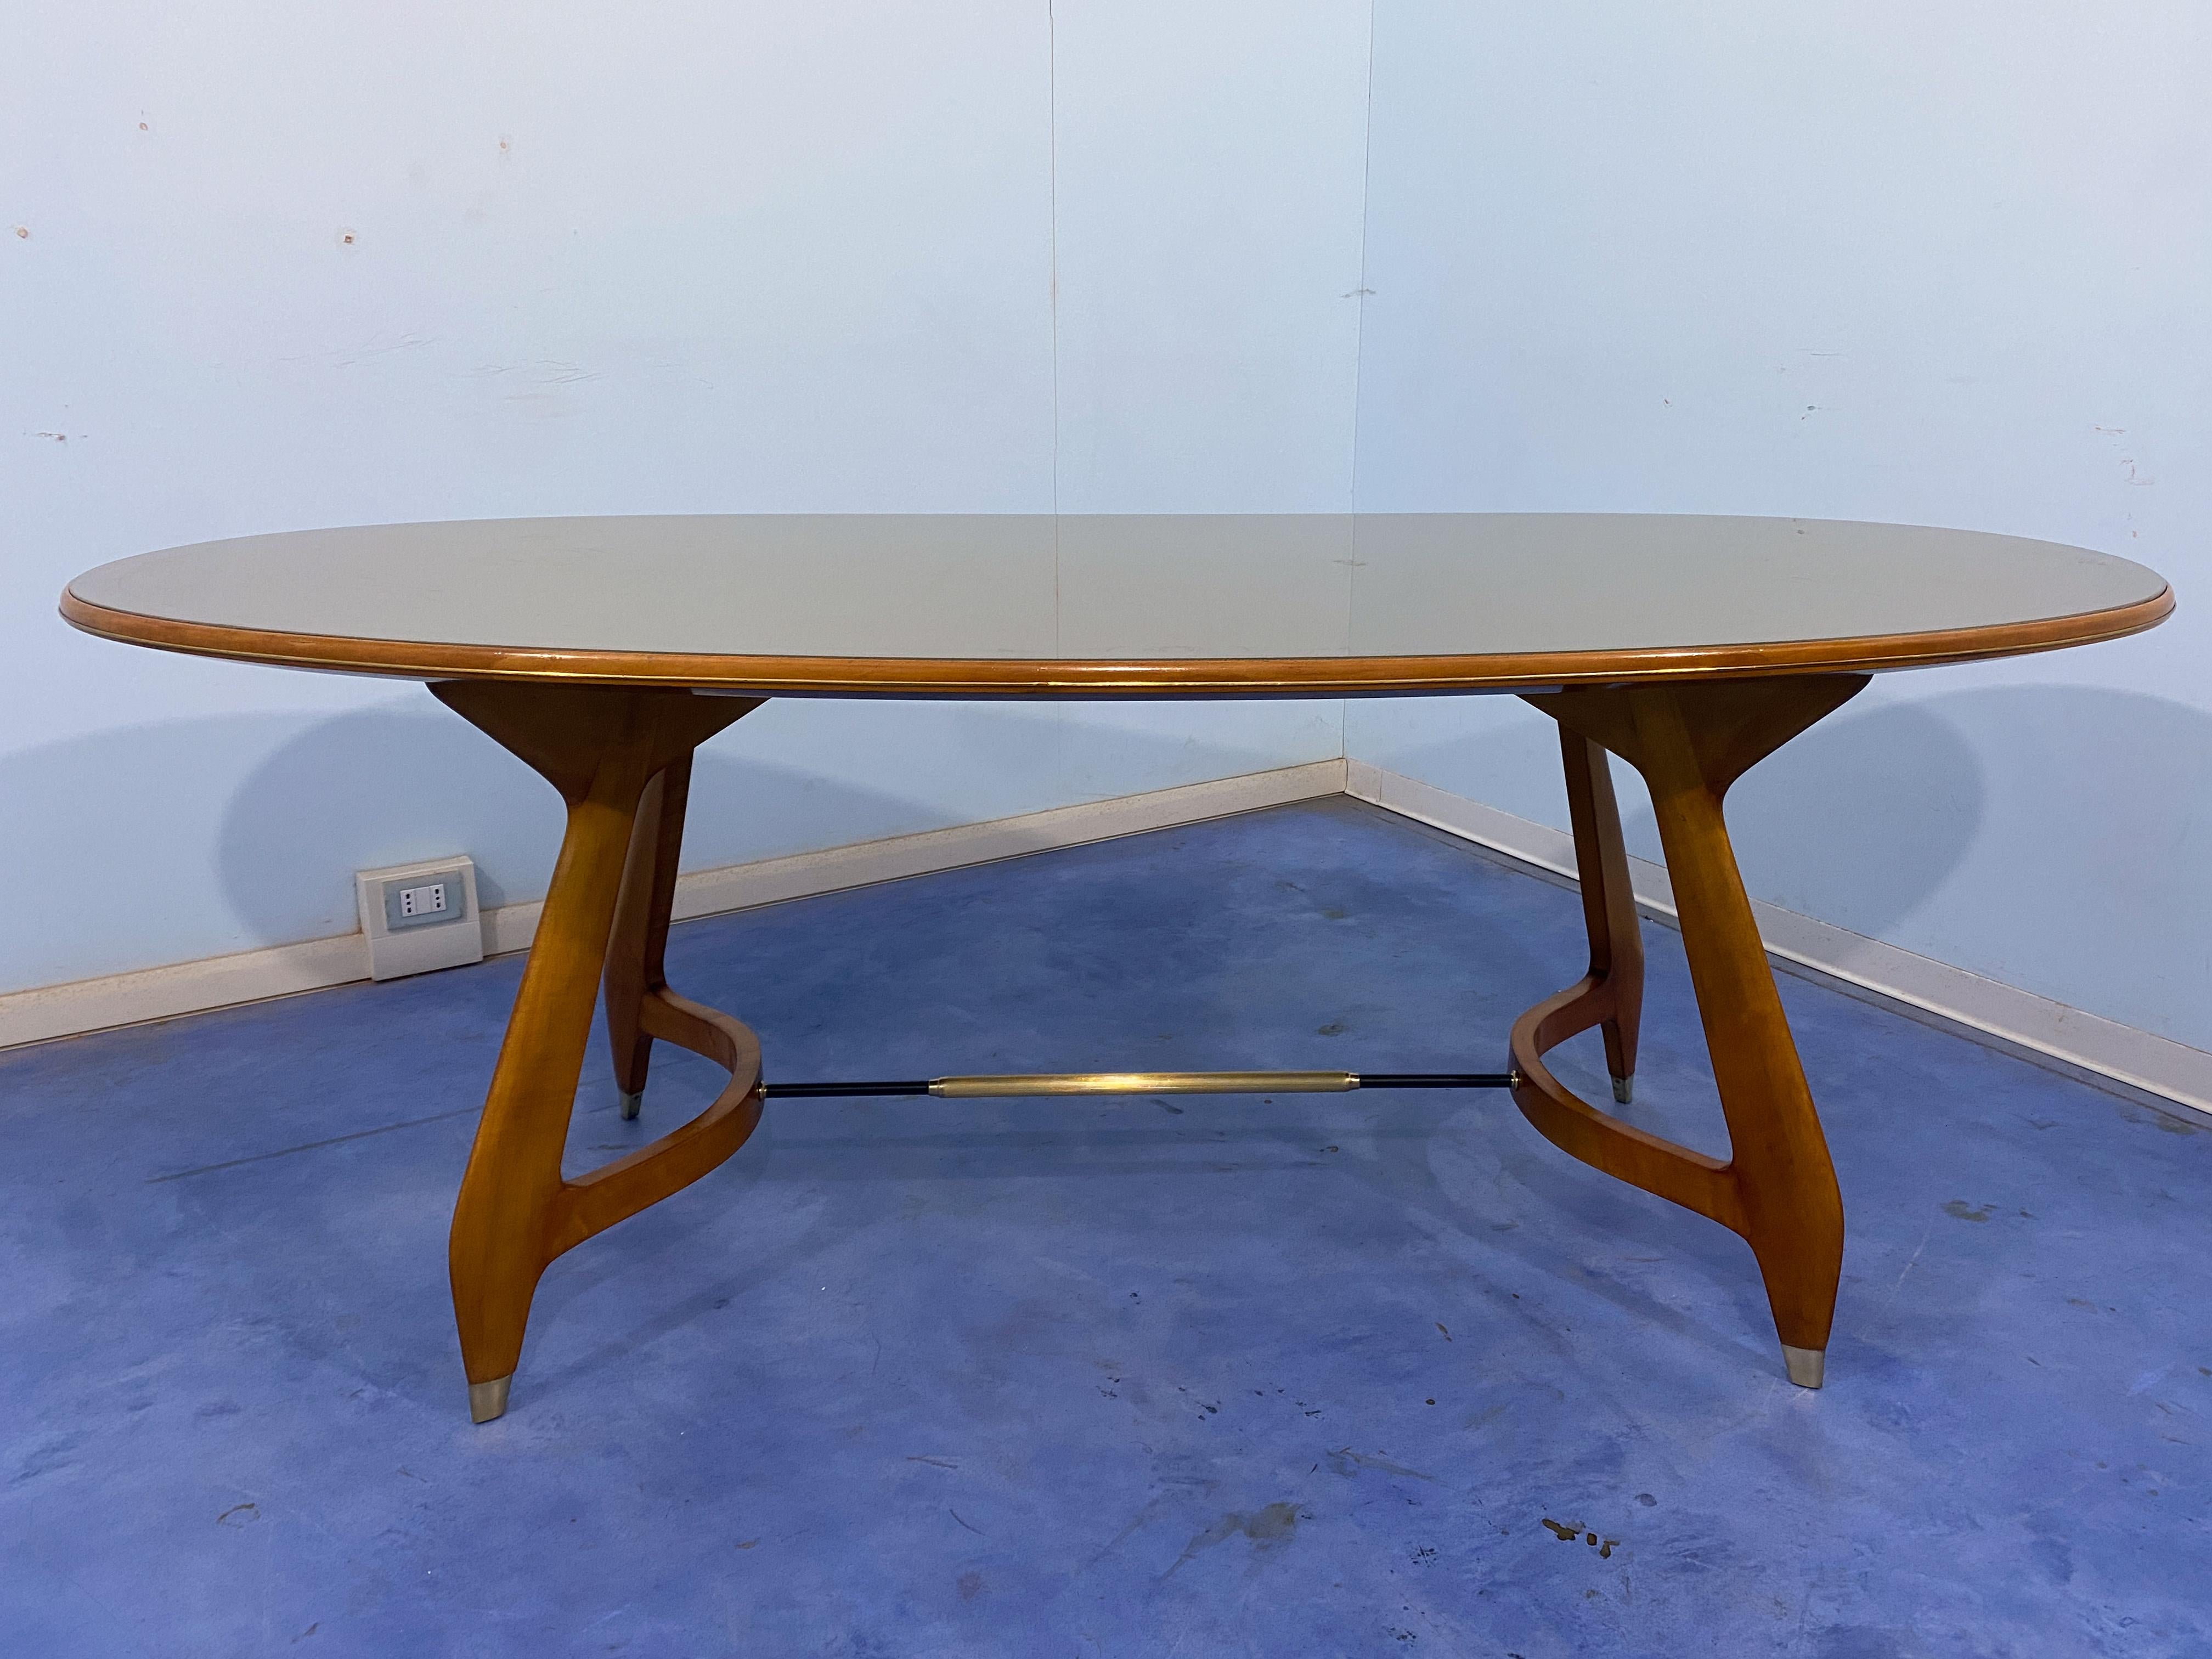 This midcentury oval dining table is a refined and elegant piece of furniture produced in Italy during the 1950s and attributed to Augusto Romano. The table has a top made of green glass, which is beautifully adorned with a decorative scroll border.